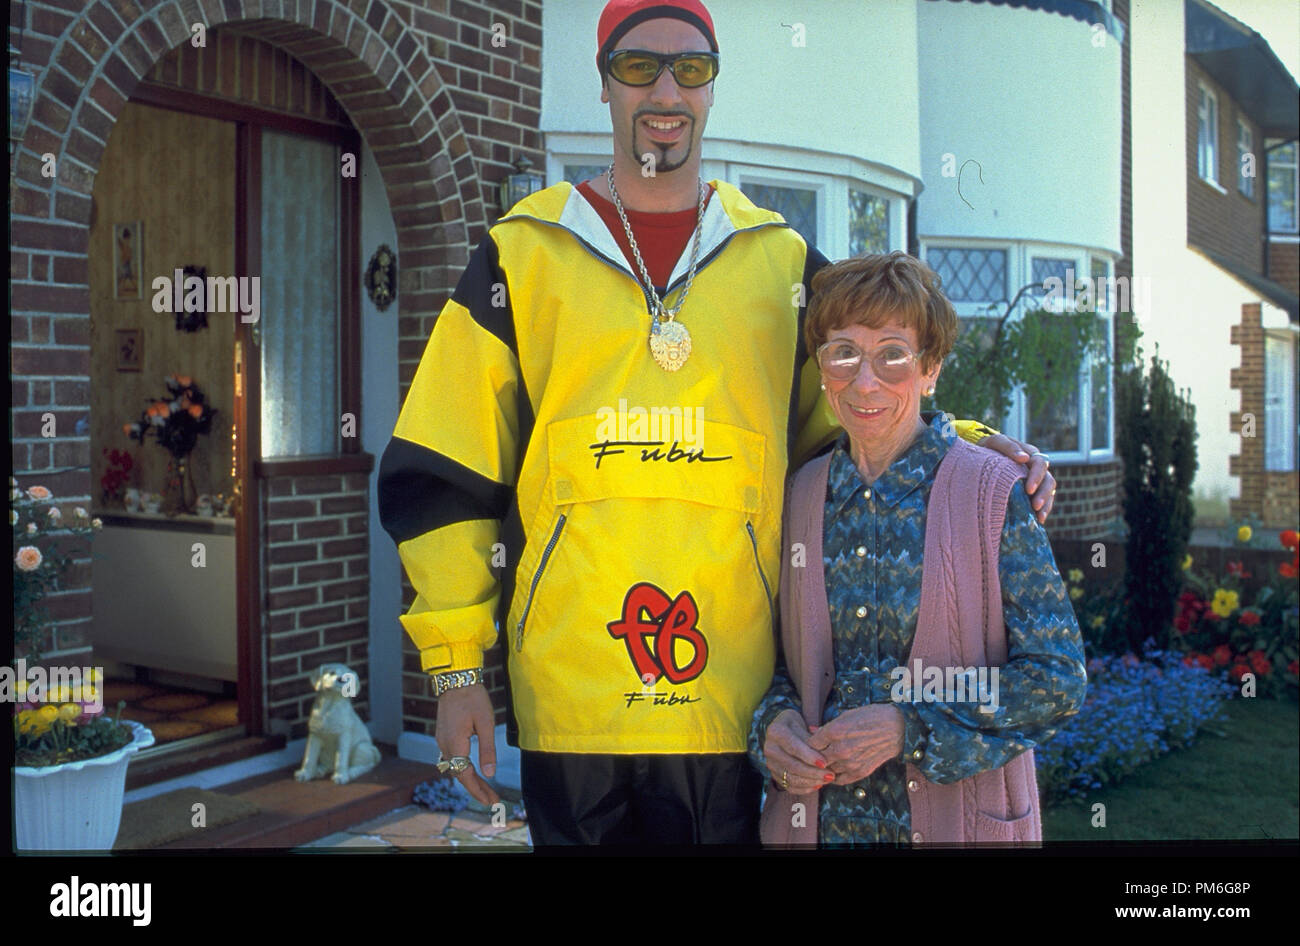 Film Still / Publicity Still from "Ali G Indahouse" Sacha Baron Cohen ©  2002 FilmFour File Reference # 307541114THA For Editorial Use Only - All  Rights Reserved Stock Photo - Alamy